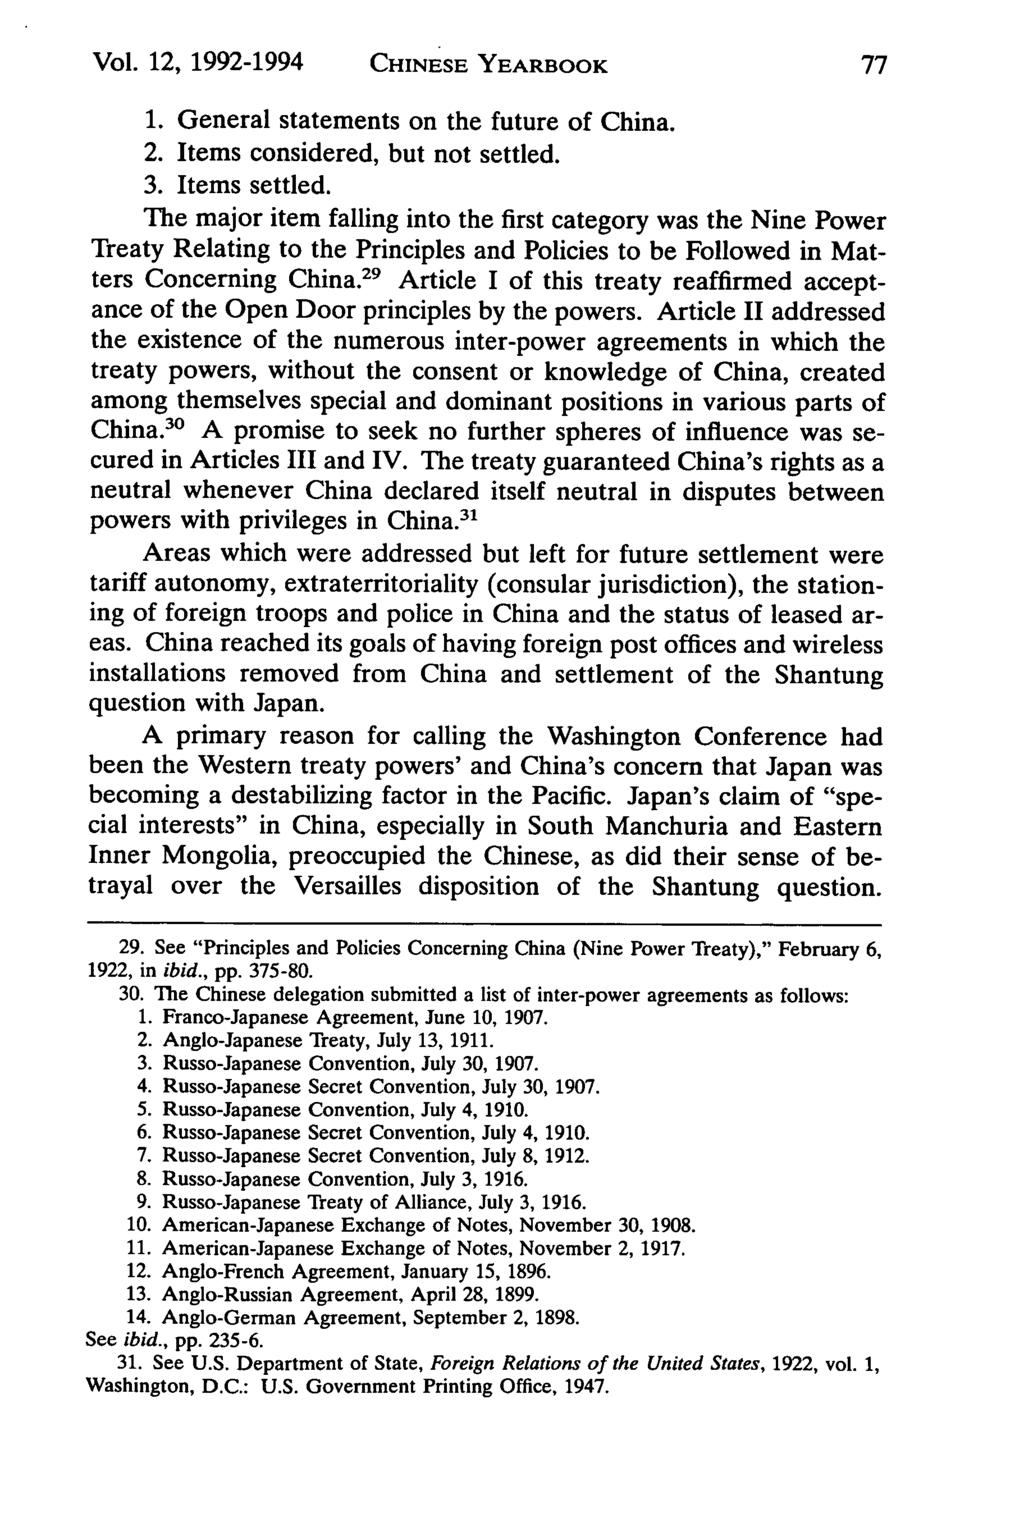 Vol. 12, 1992-1994 CHINESE YEARBOOK 1. General statements on the future of China. 2. Items considered, but not settled. 3. Items settled.